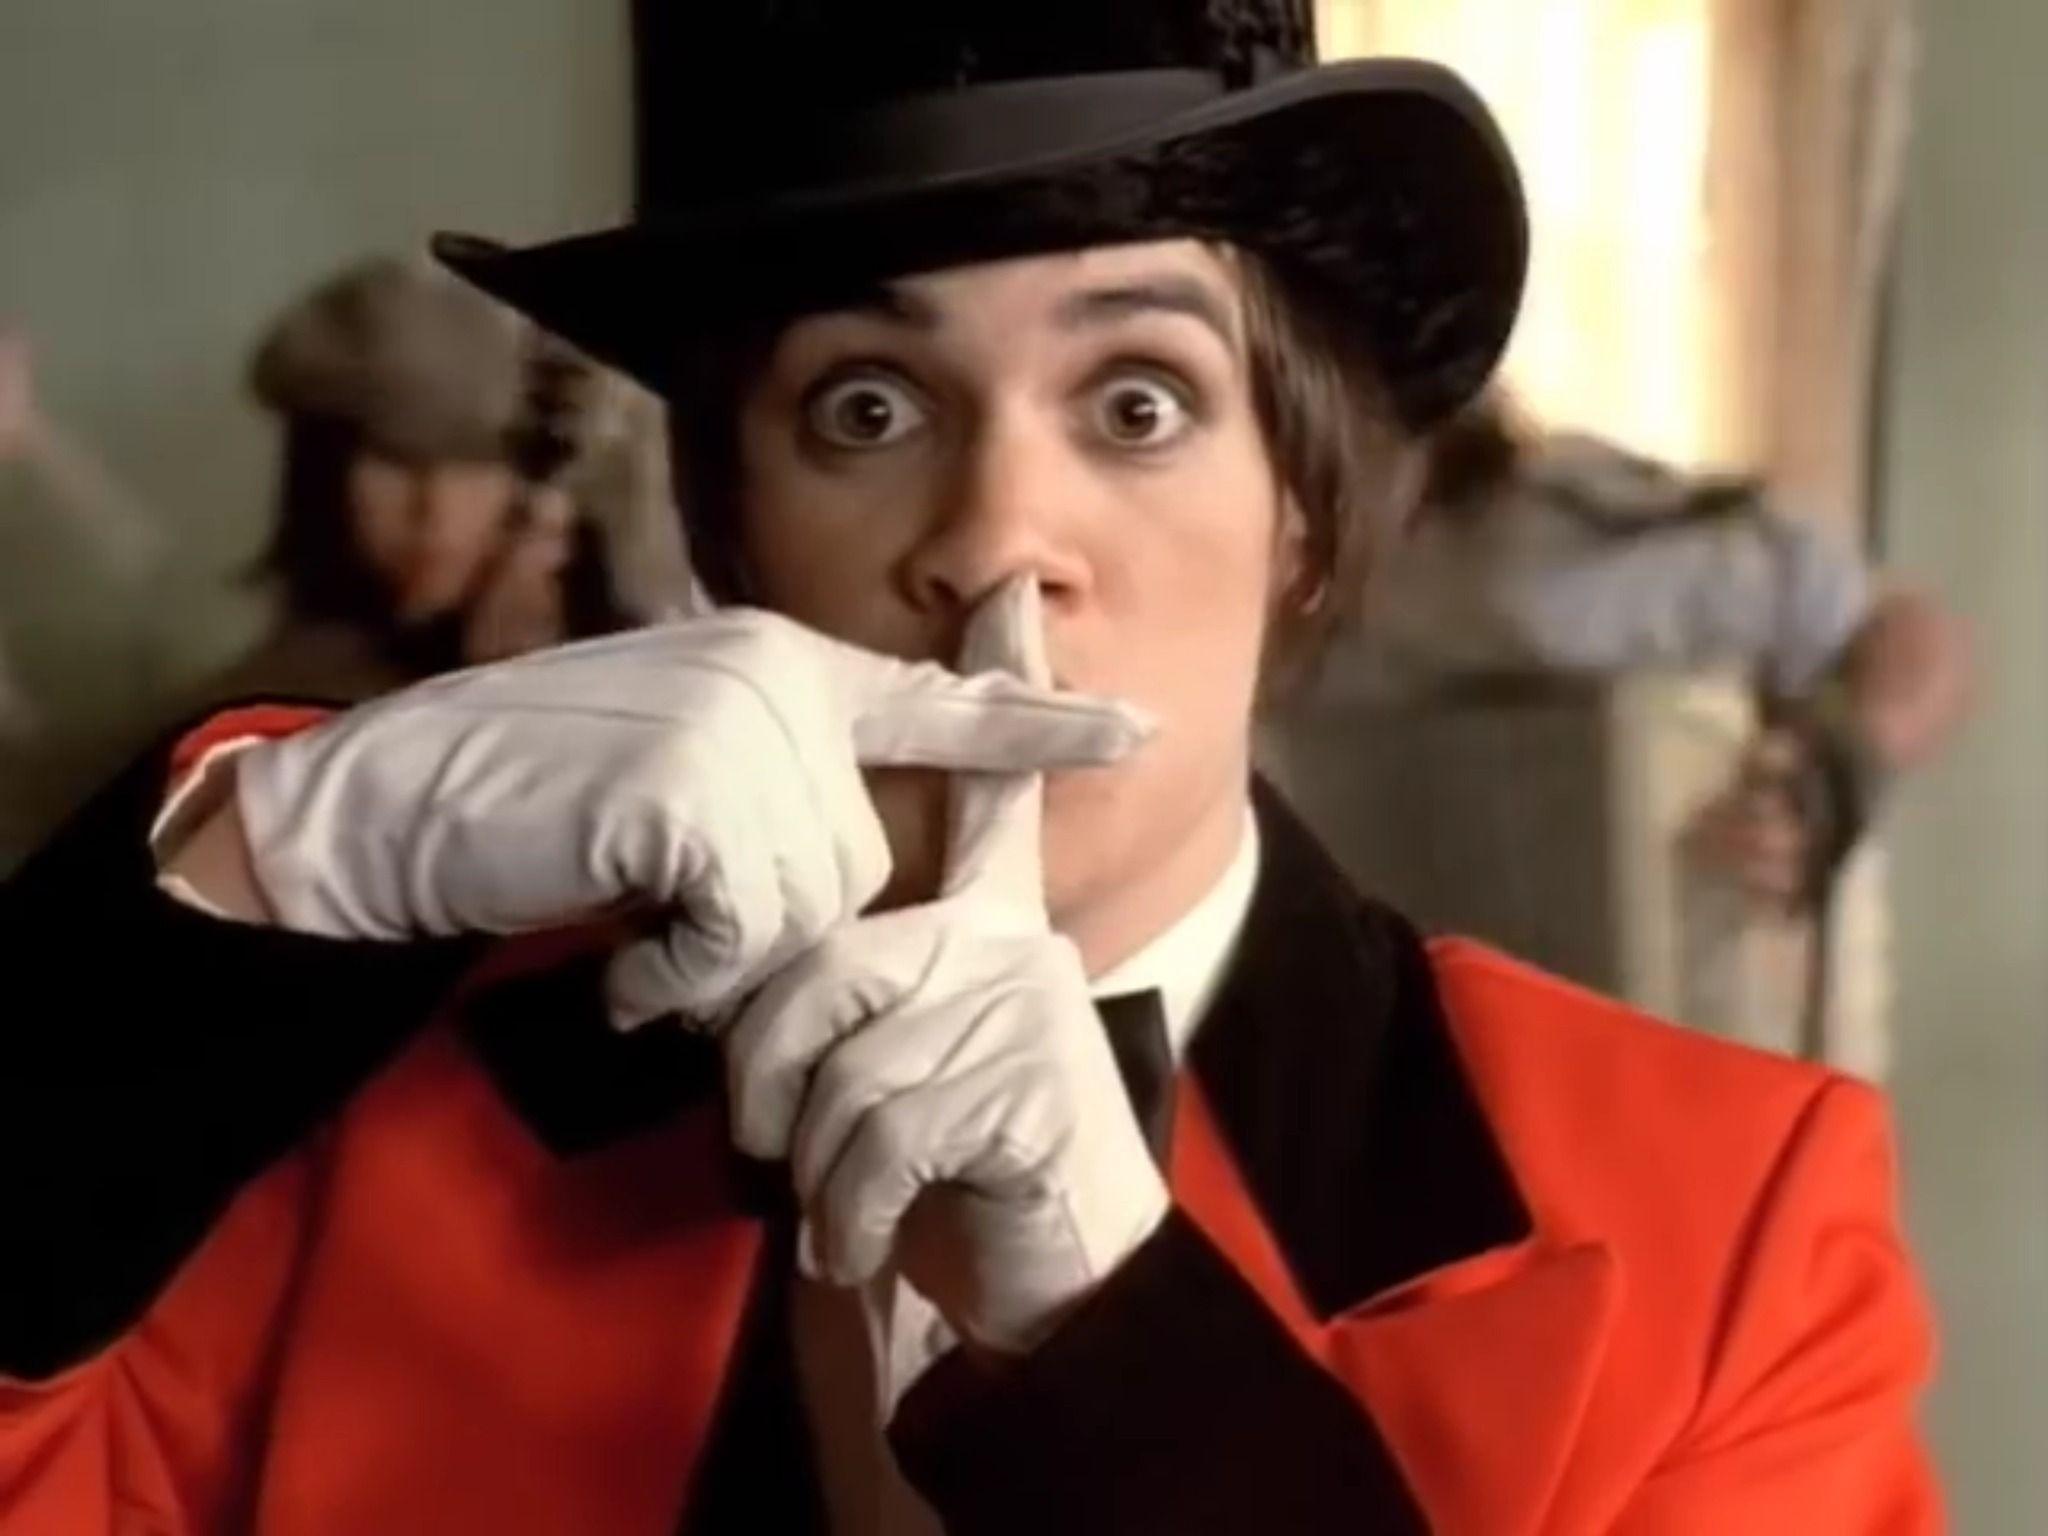 A screenshot from the music video for Panic! at the Disco's 'I Write Sins, Not Tragedies' featuring a wide-eyed man in a black top hot and red and black suit making a cross with white-gloved fingers in front of his mouth.